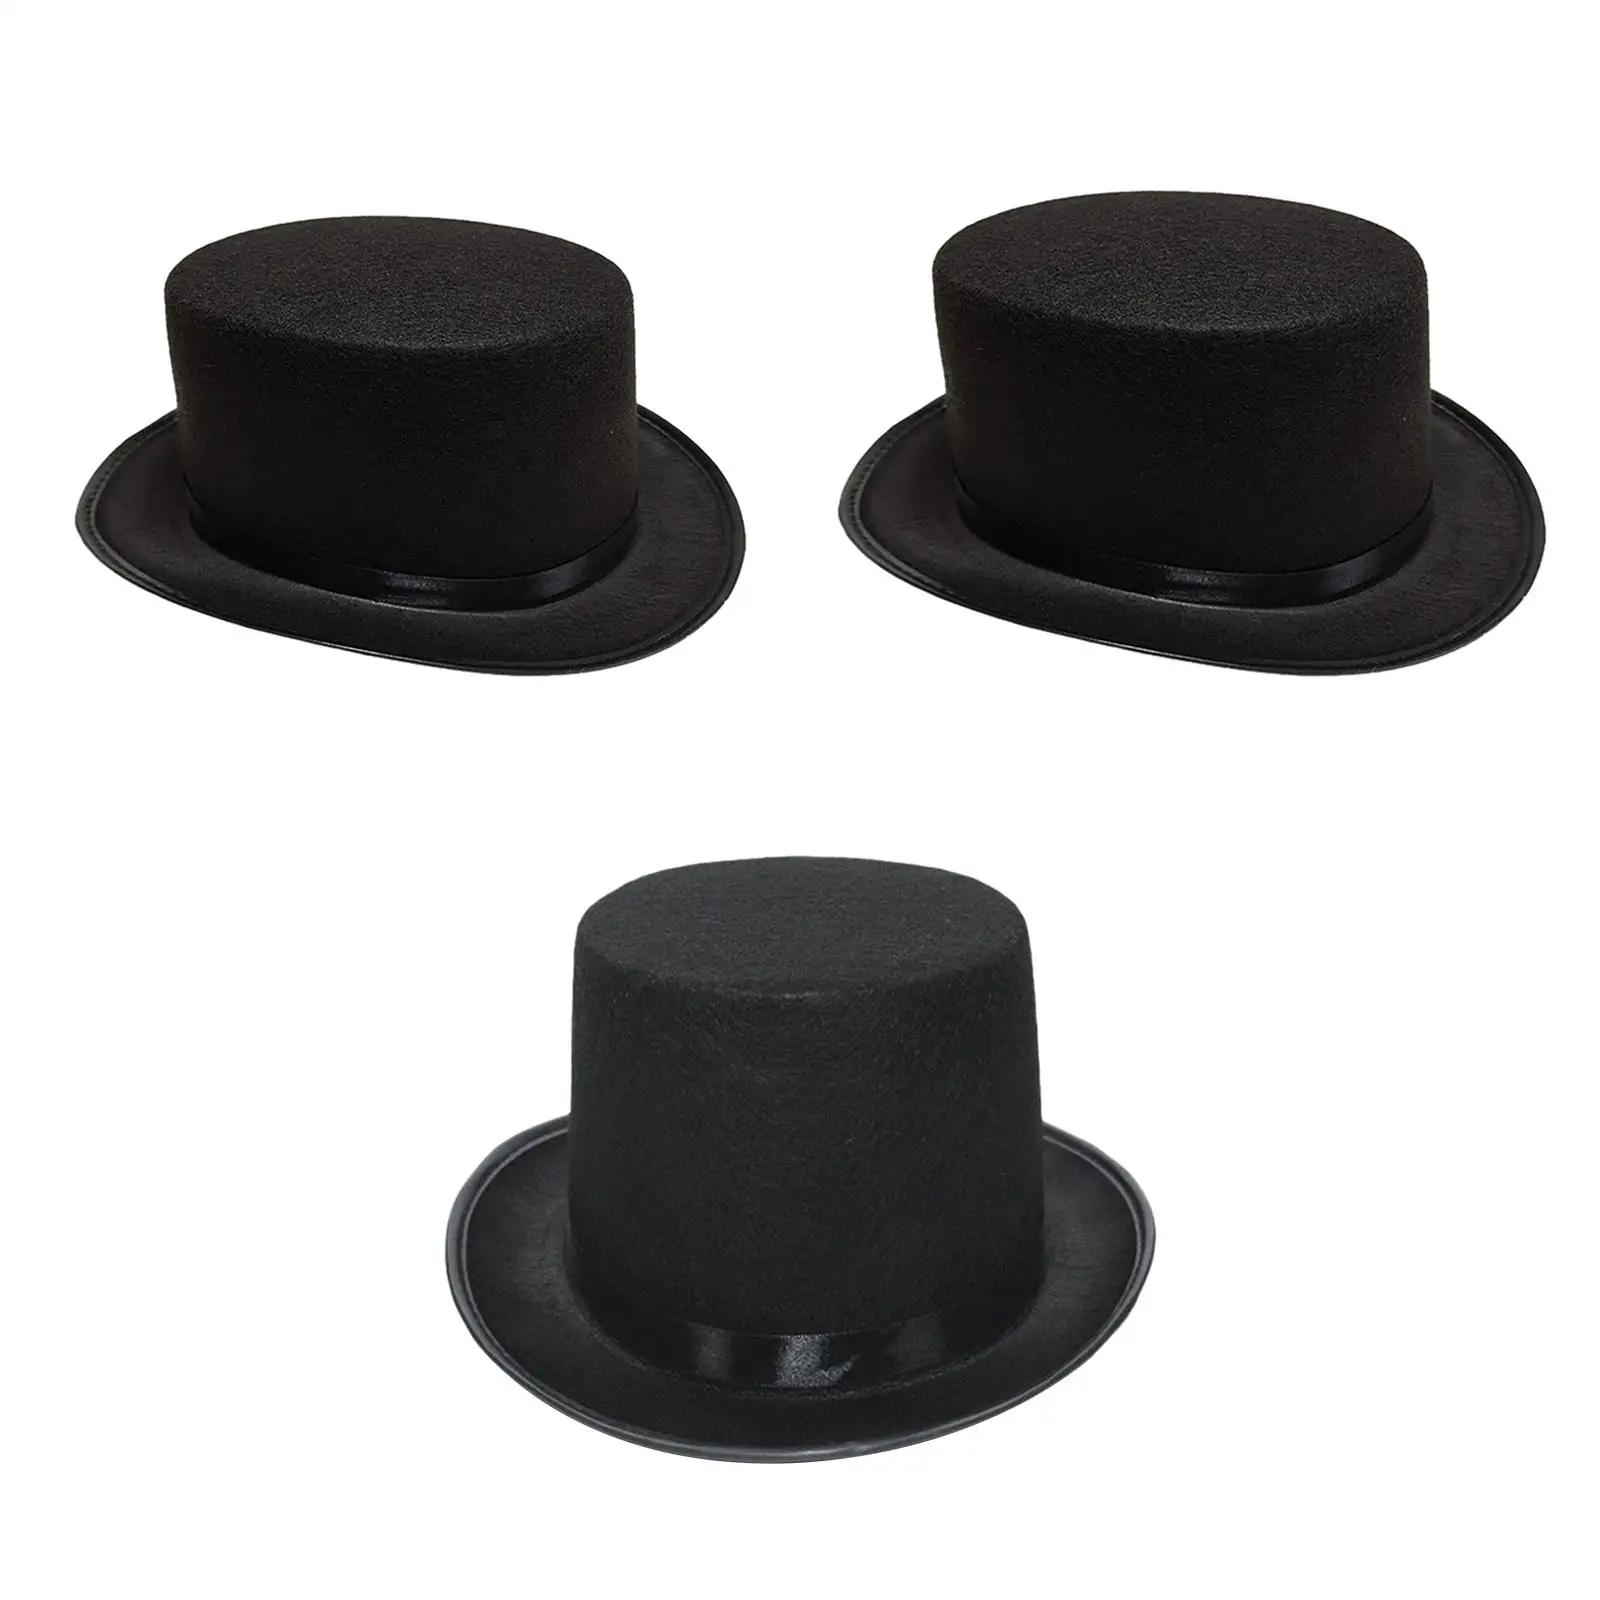 Felt Top Hat with Satin Band Dress up Fedora Hat Jazz Hat Magician Hat for Cosplay Masquerade Festival Themed Parties Carnival